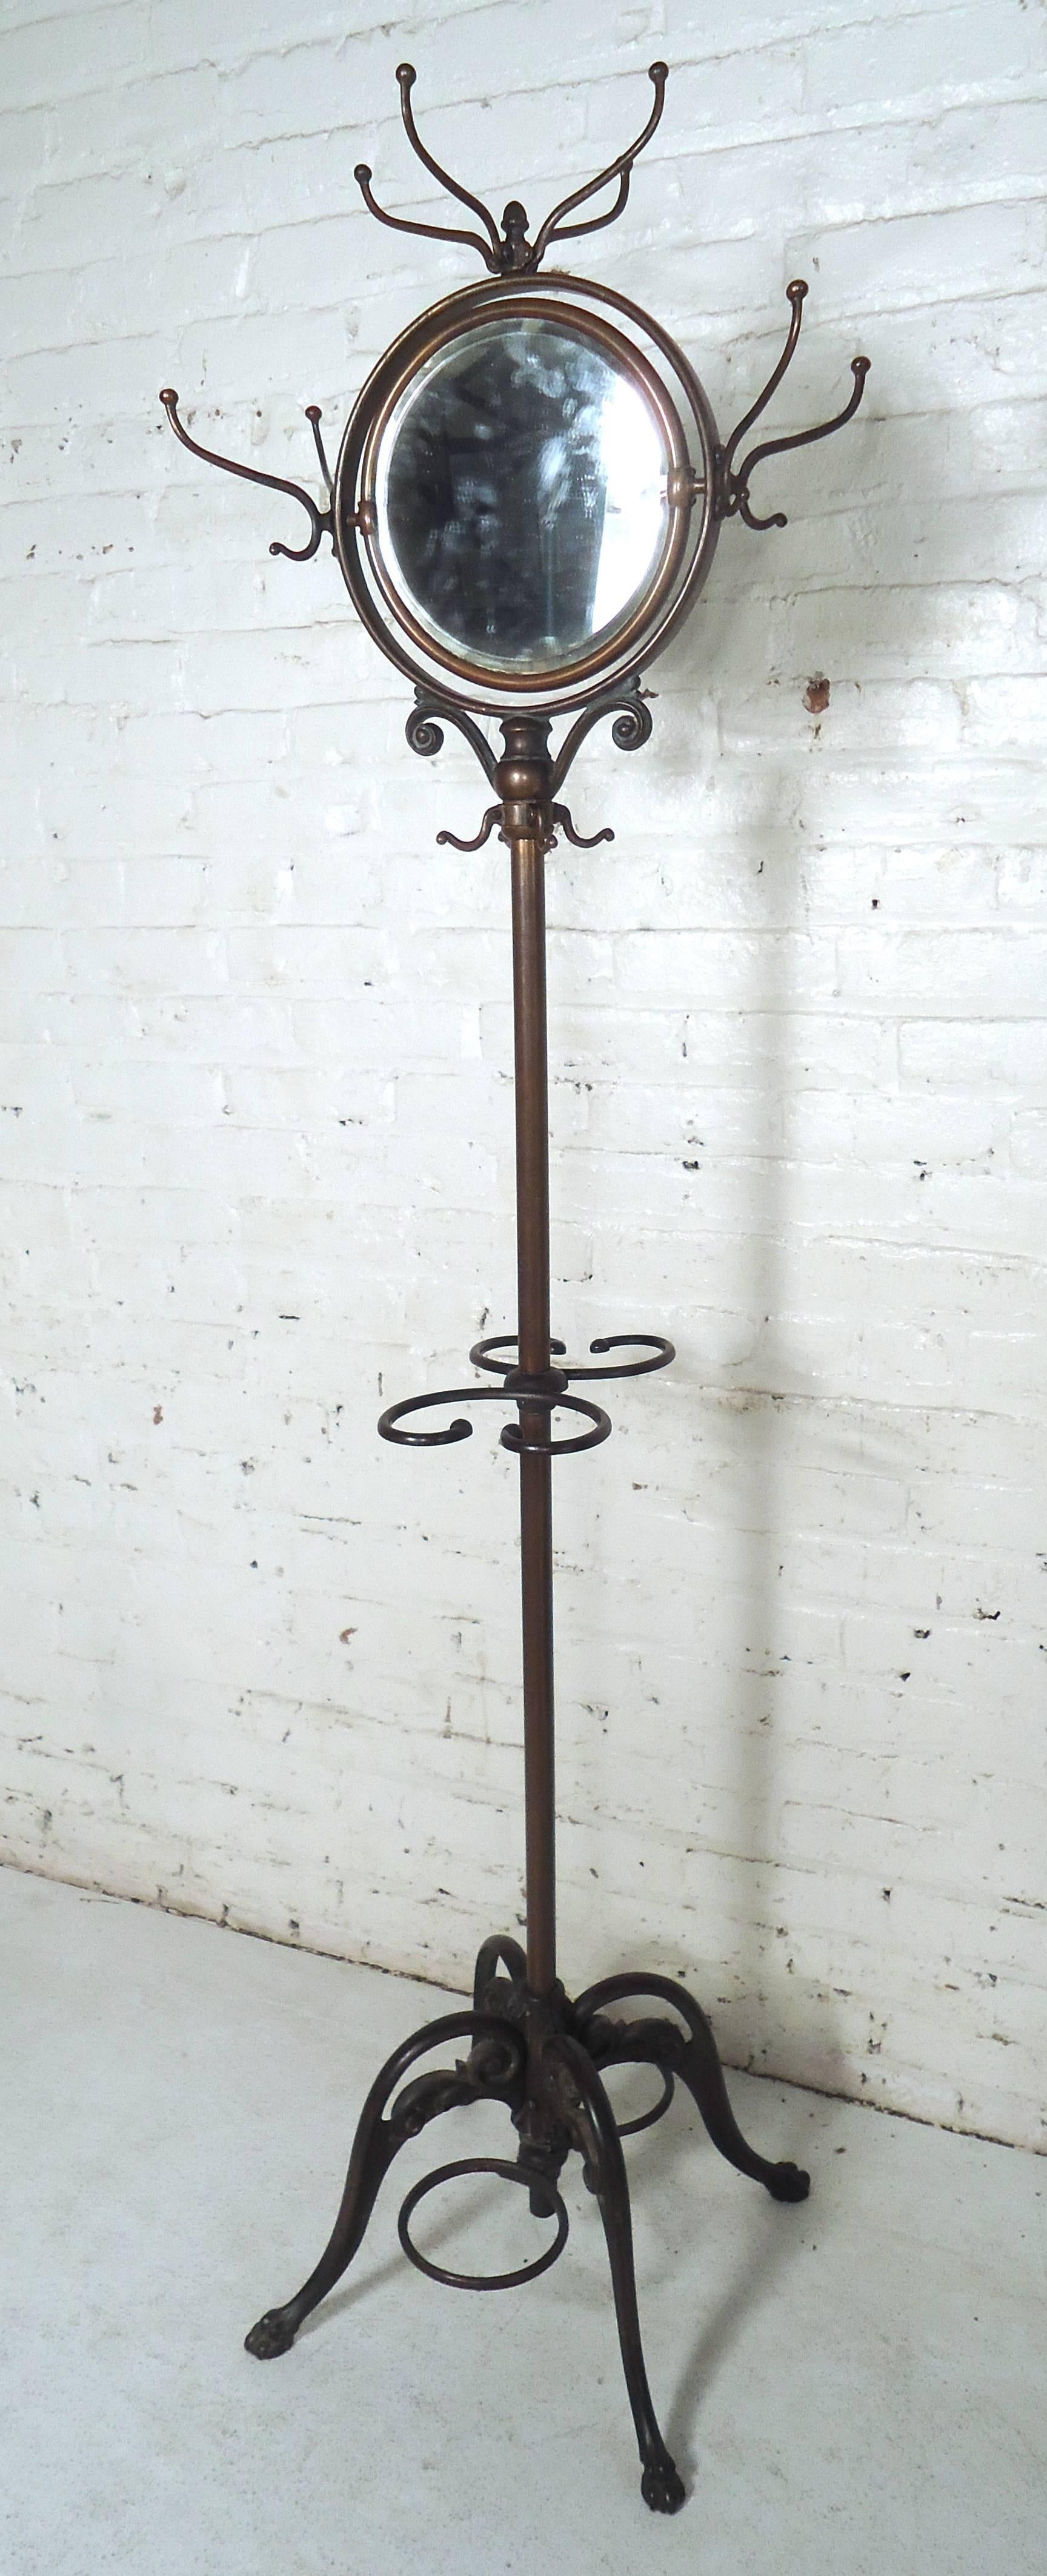 Antique iron coat rack features a cast iron base and oval mirrored top. Very unique and beautiful for home or office.

(Please confirm item location NY or NJ with dealer).